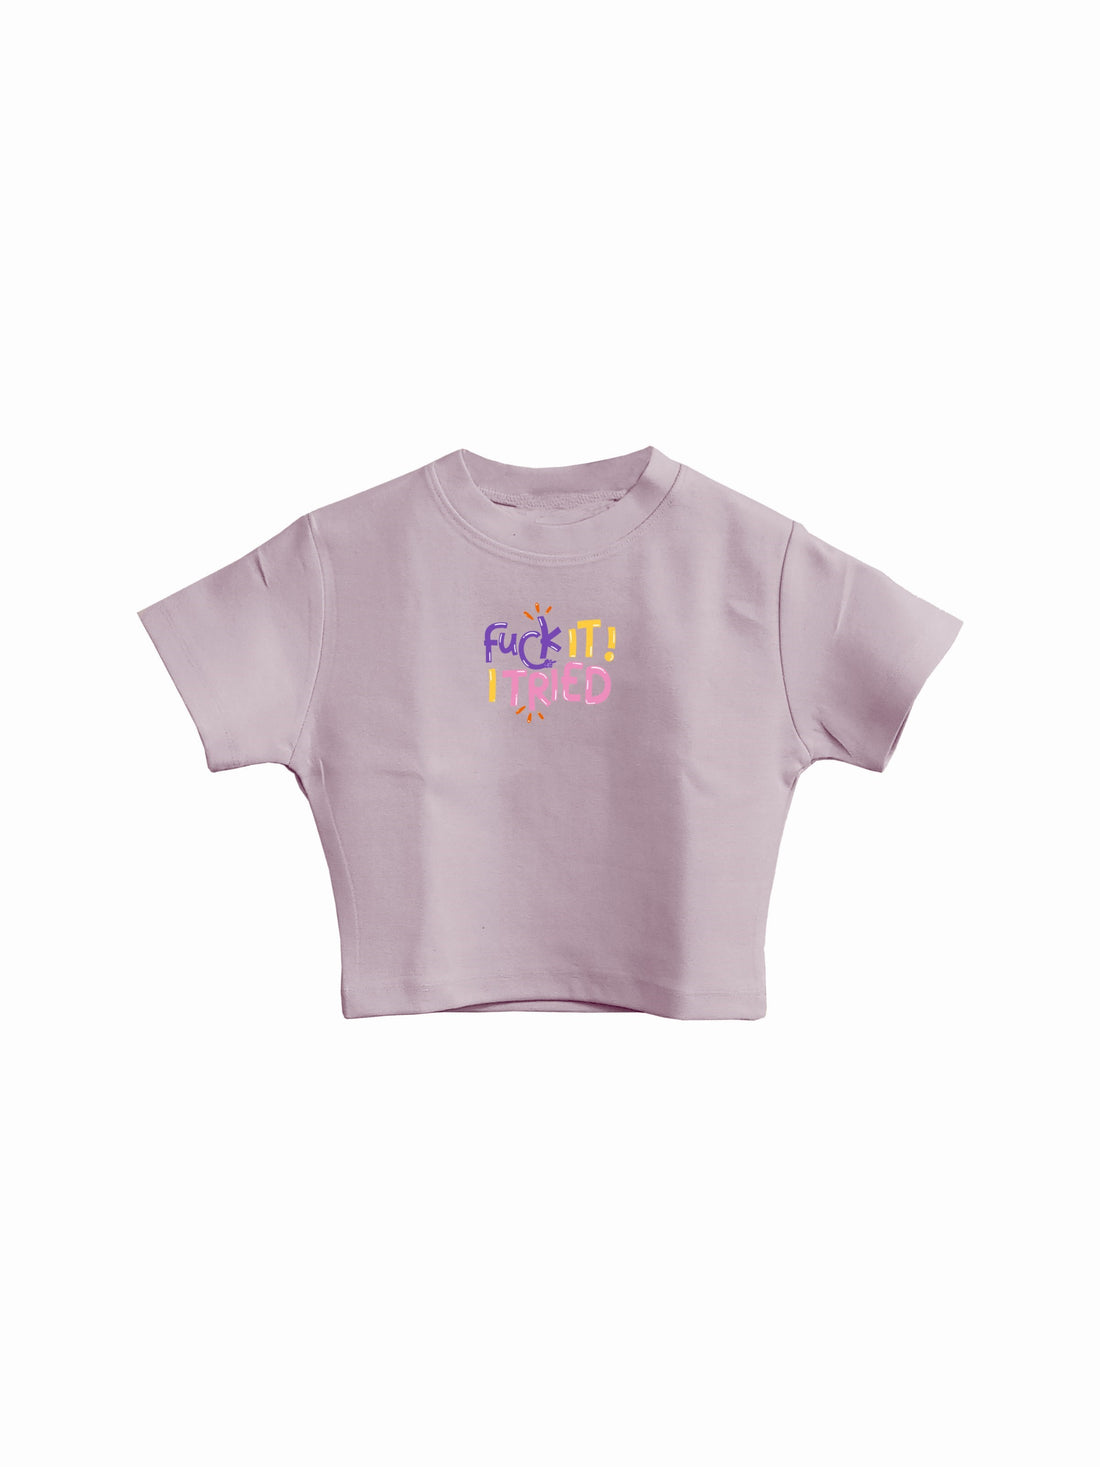 Fuck It I Tried - Burger Bae Round Neck Crop Baby Tee For Women